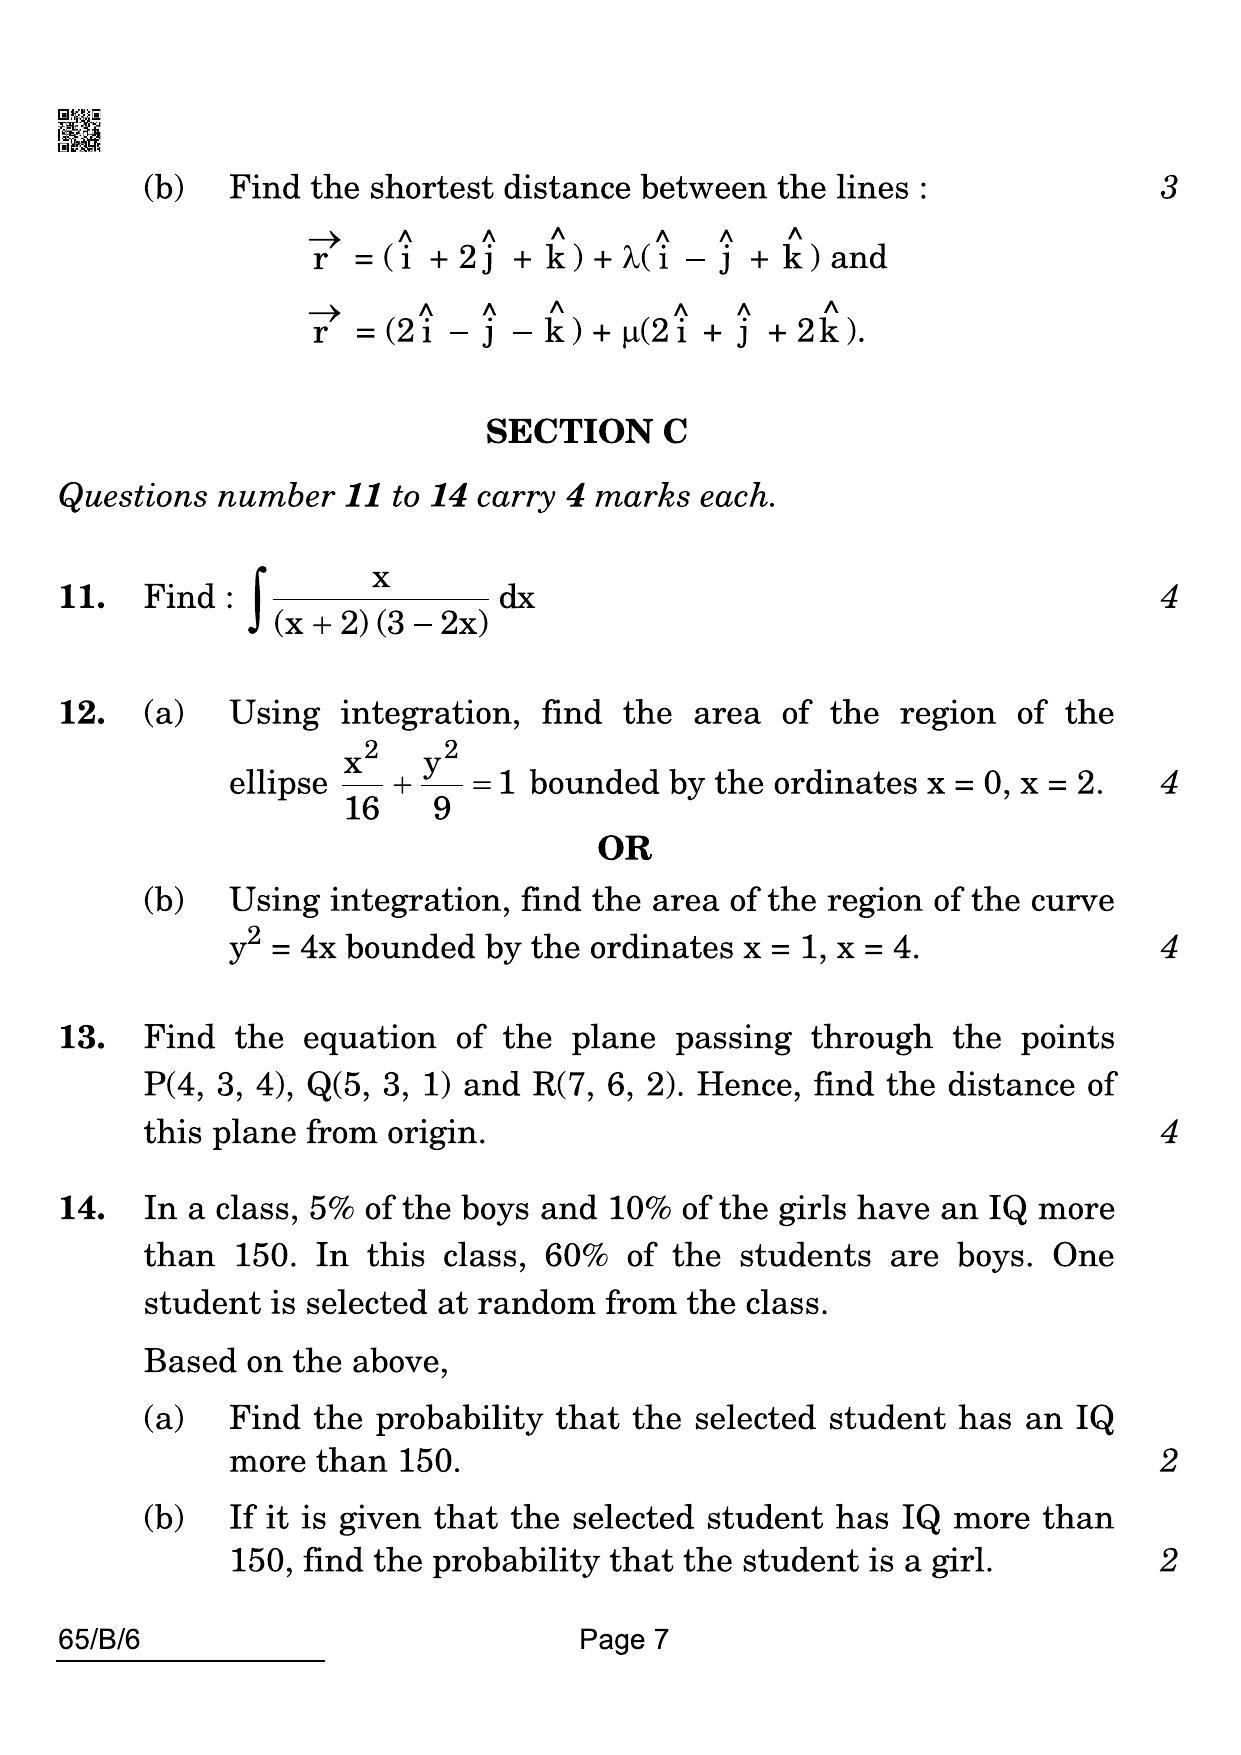 CBSE Class 12 65-B-6 Maths Blind 2022 Compartment Question Paper - Page 7